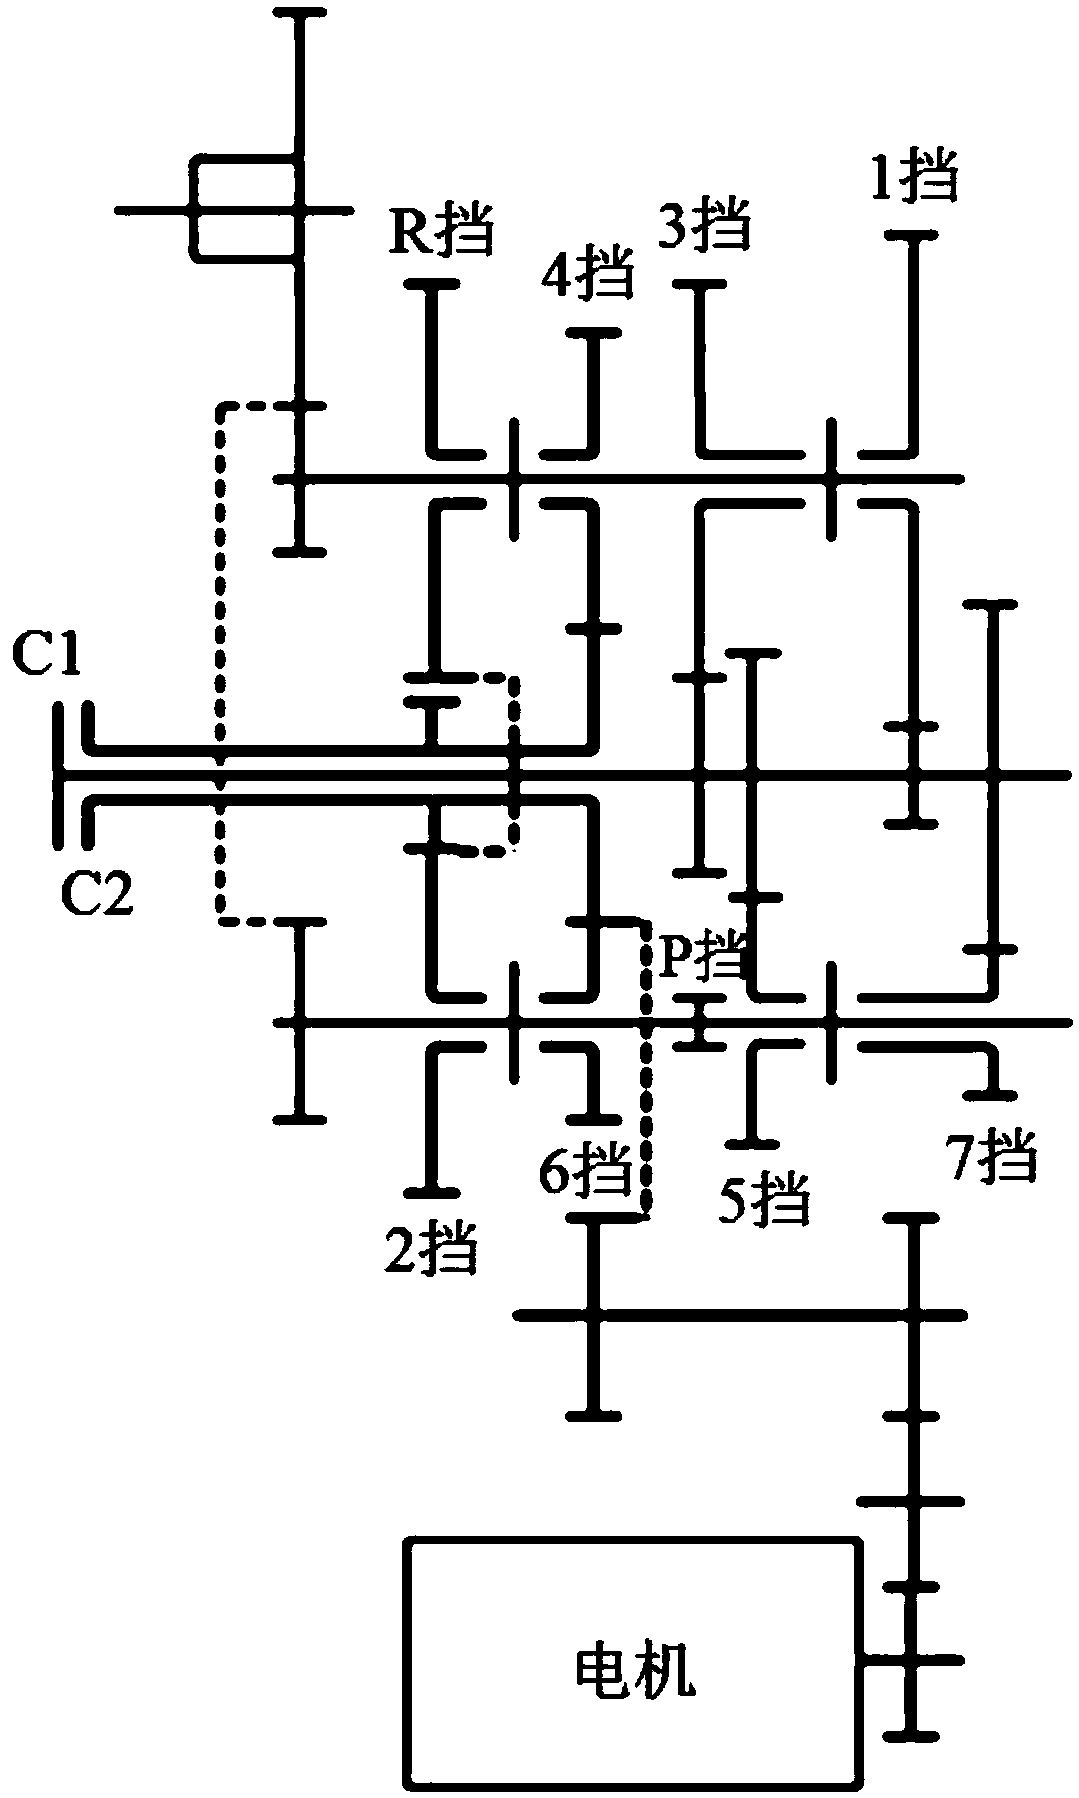 High-voltage power supply control method for hybrid power vehicle